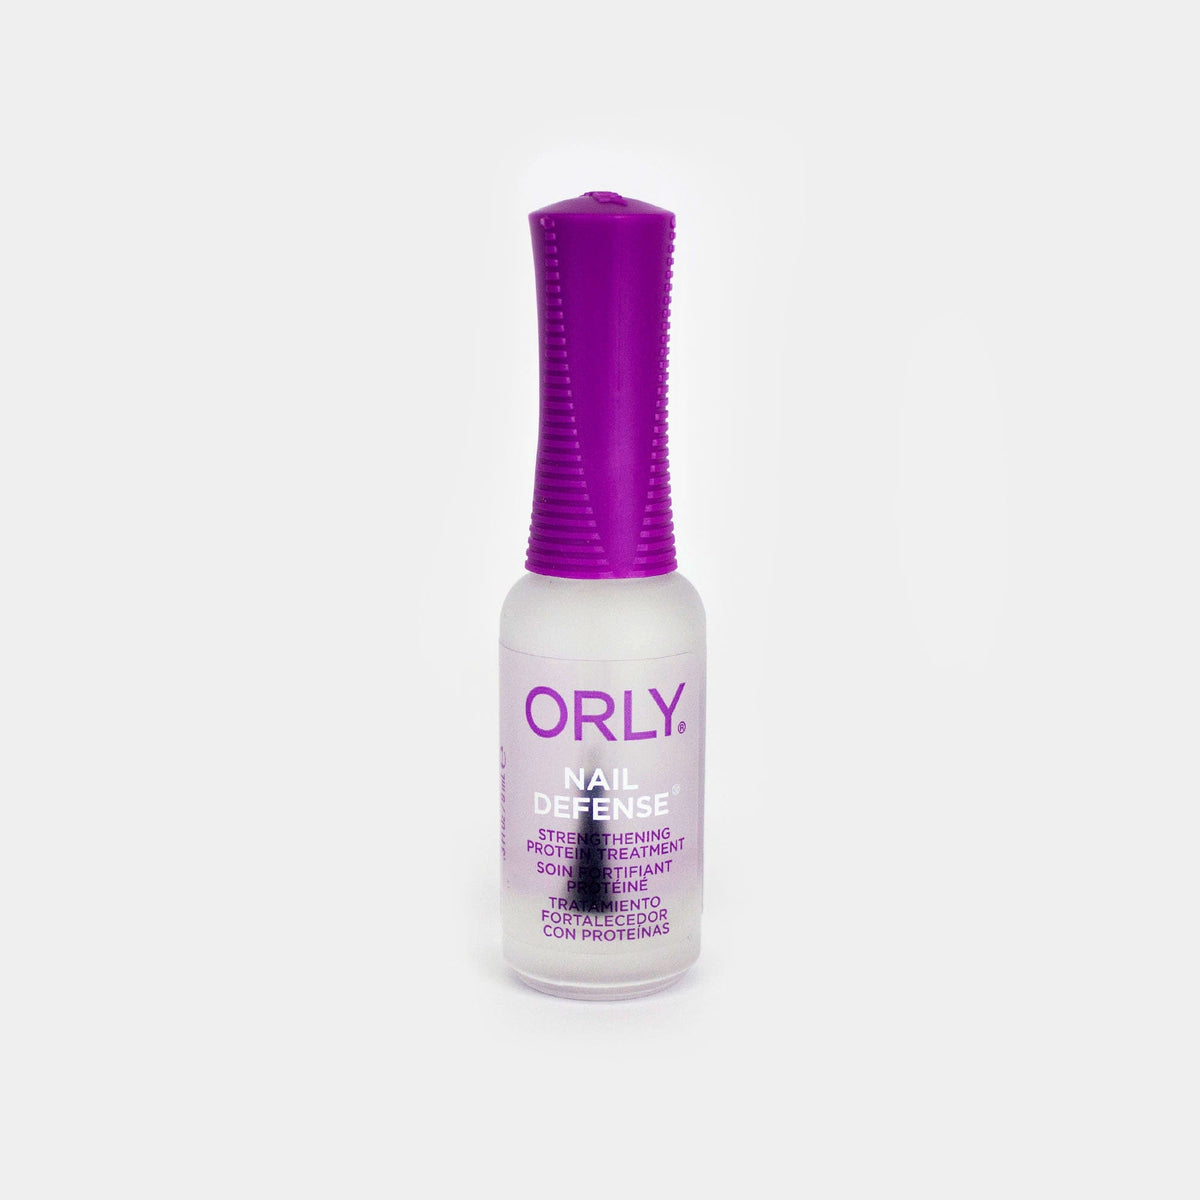 Orly Nail Defense 9mL product photo - photographed in New Zealand